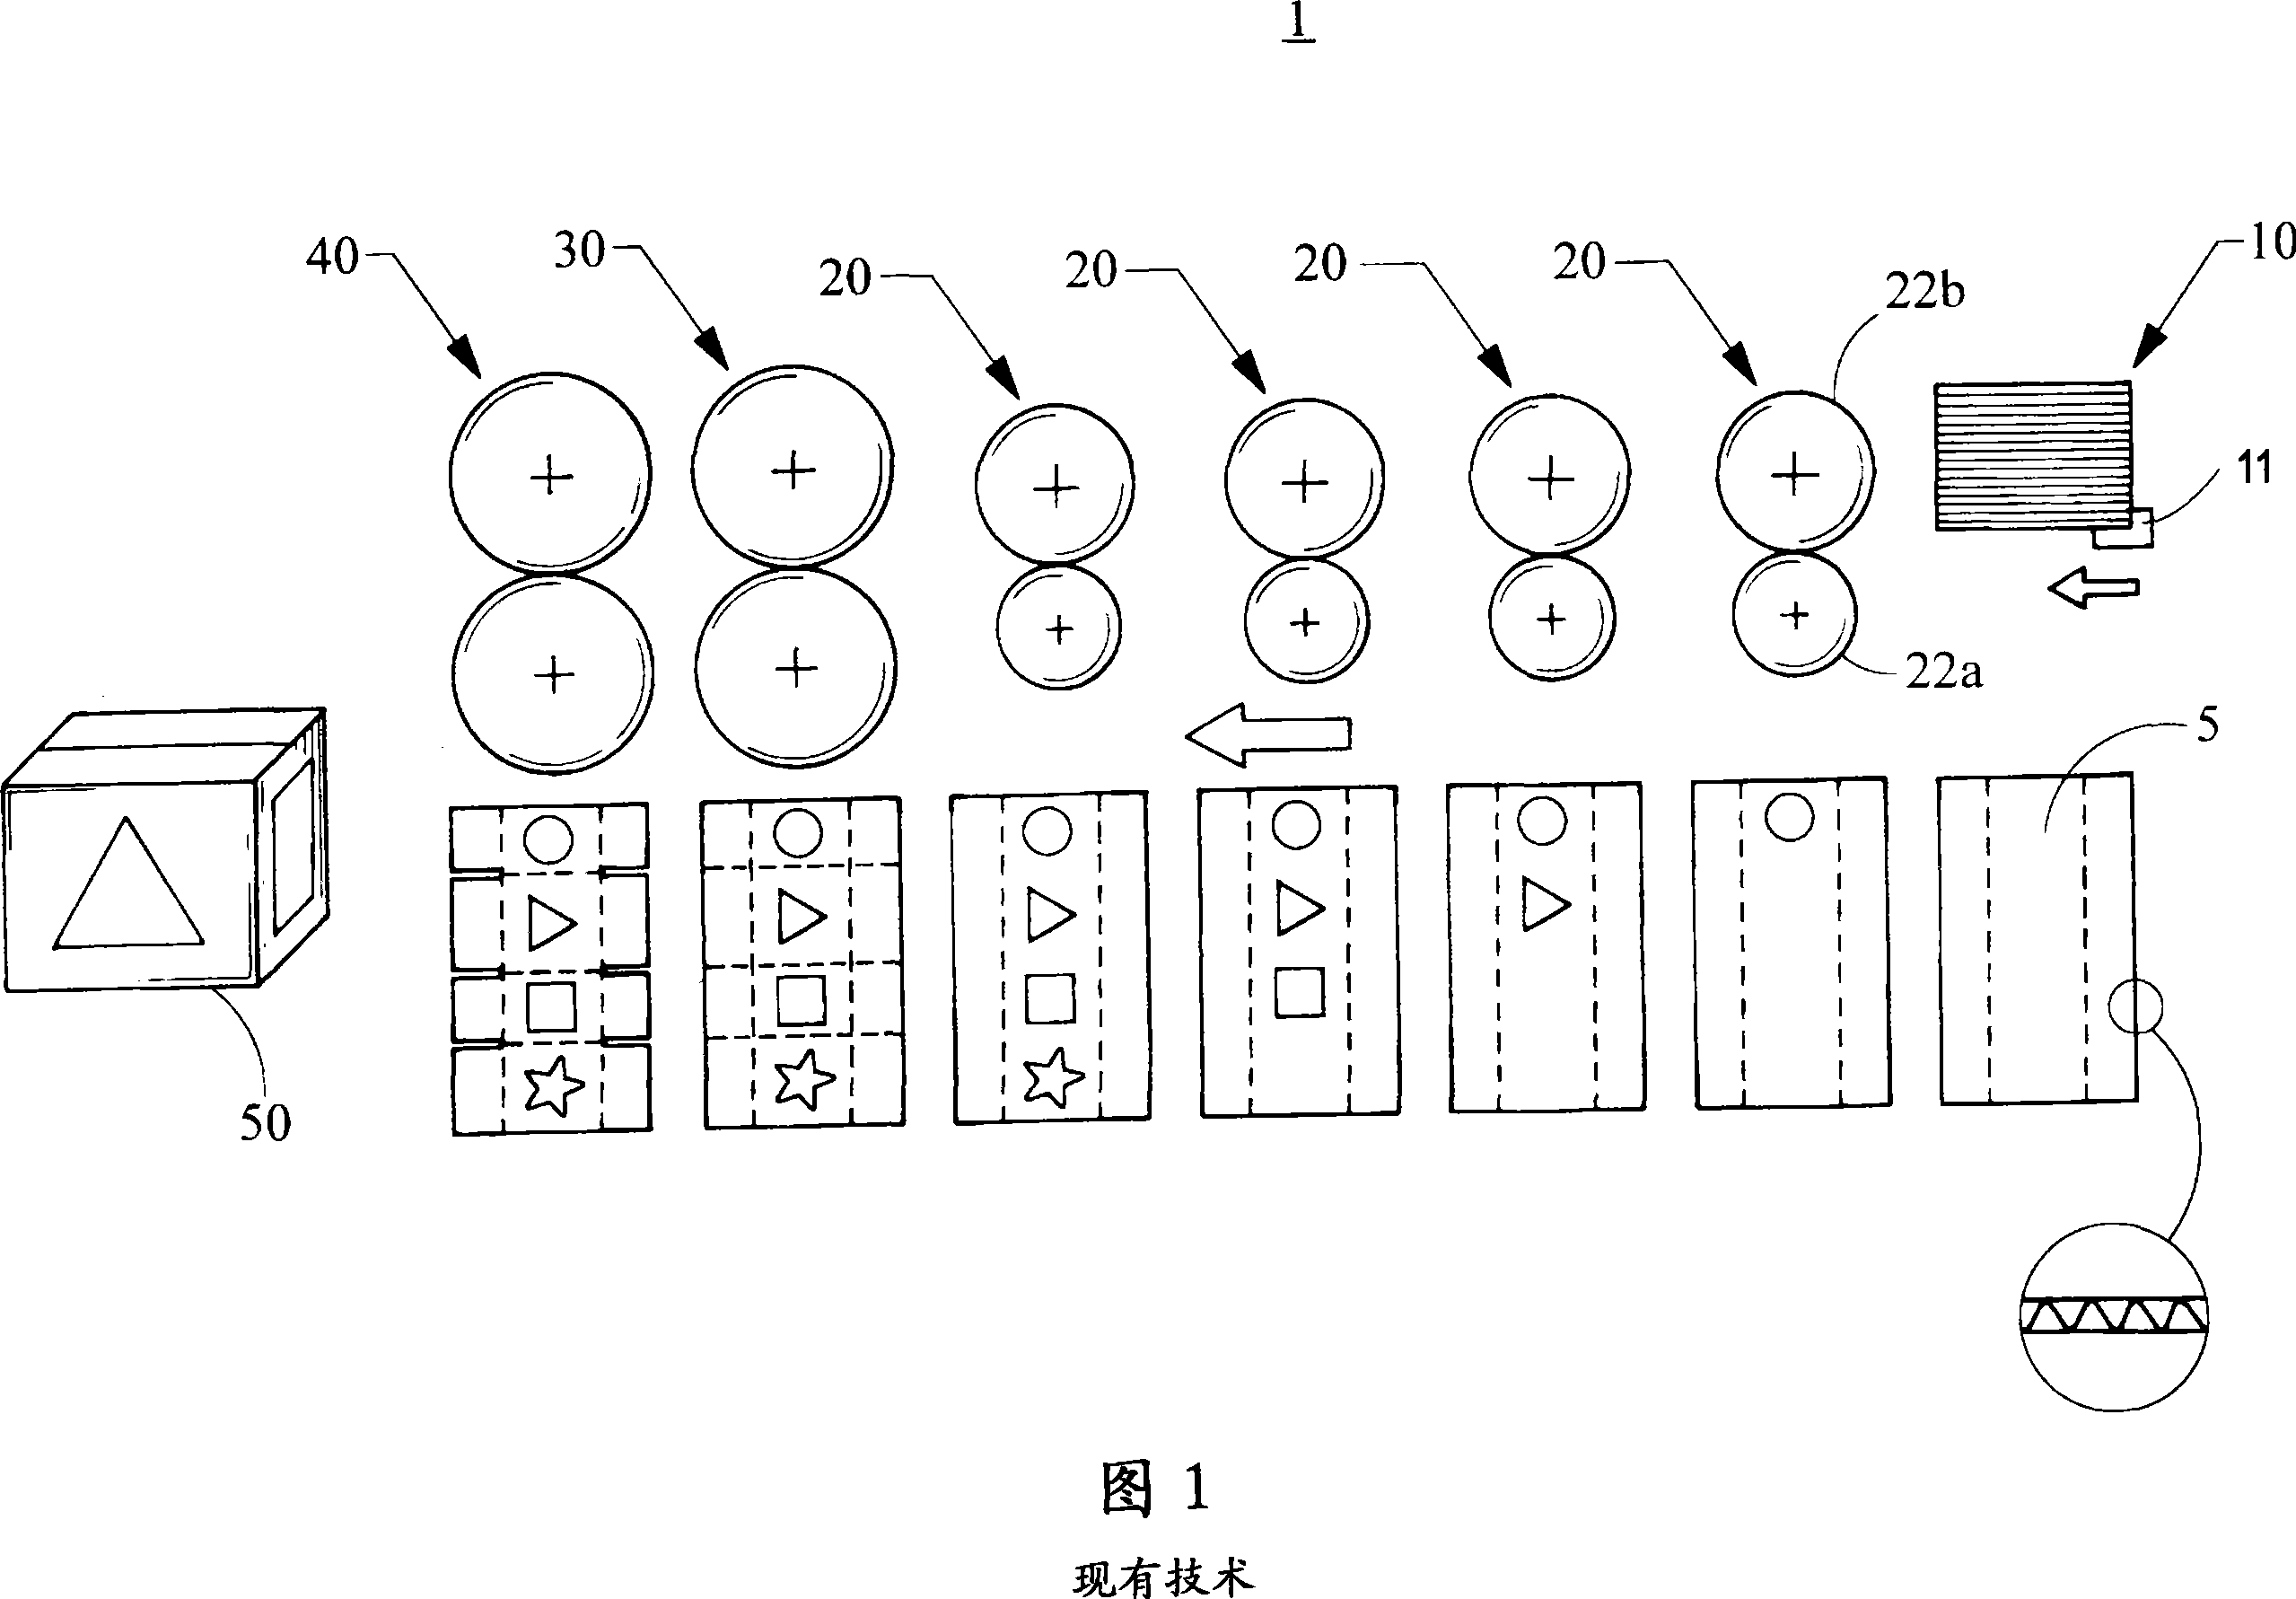 Apparatus and method for printing corrugated cardboard sheets